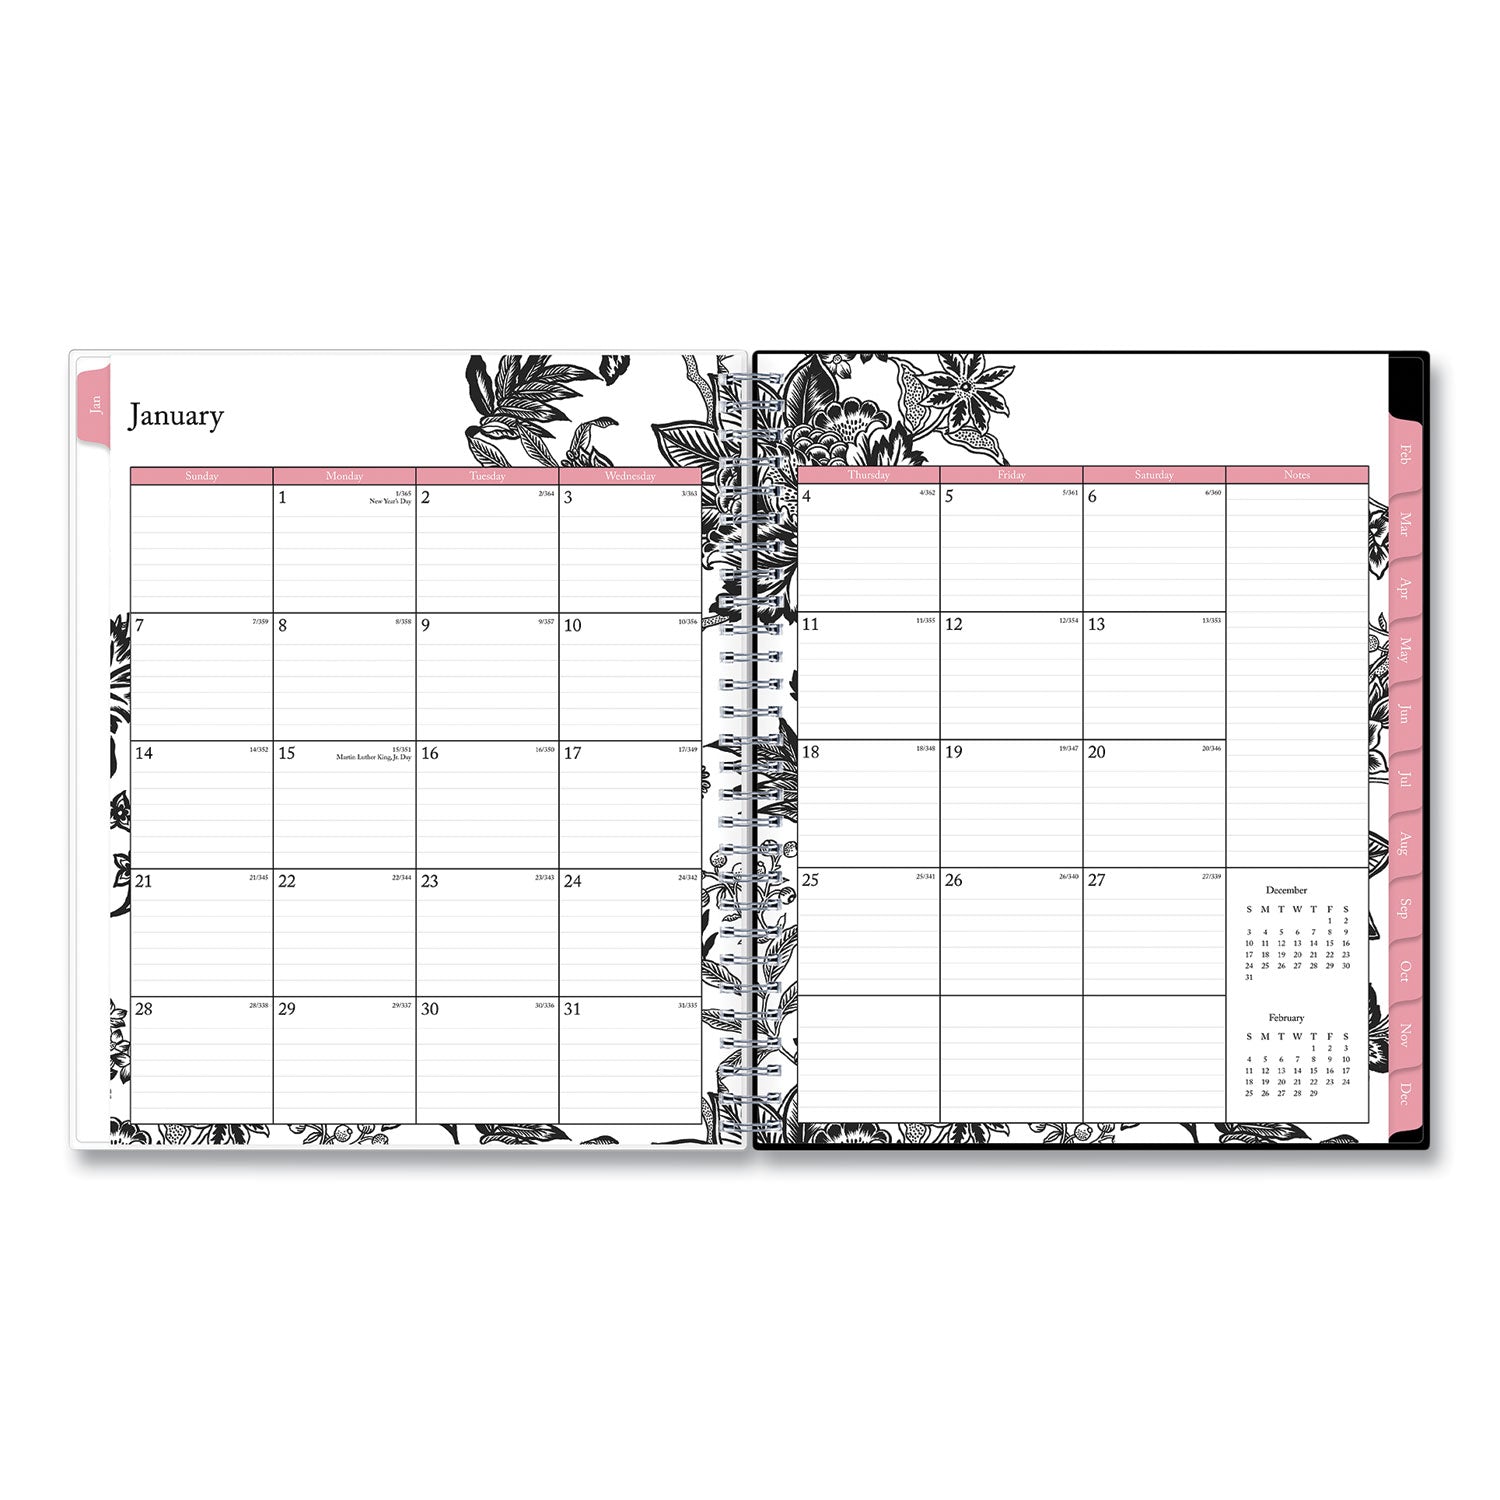 analeis-monthly-planner-analeis-floral-artwork-10-x-8-white-black-coral-cover-12-month-jan-to-dec-2024_bls100004 - 2